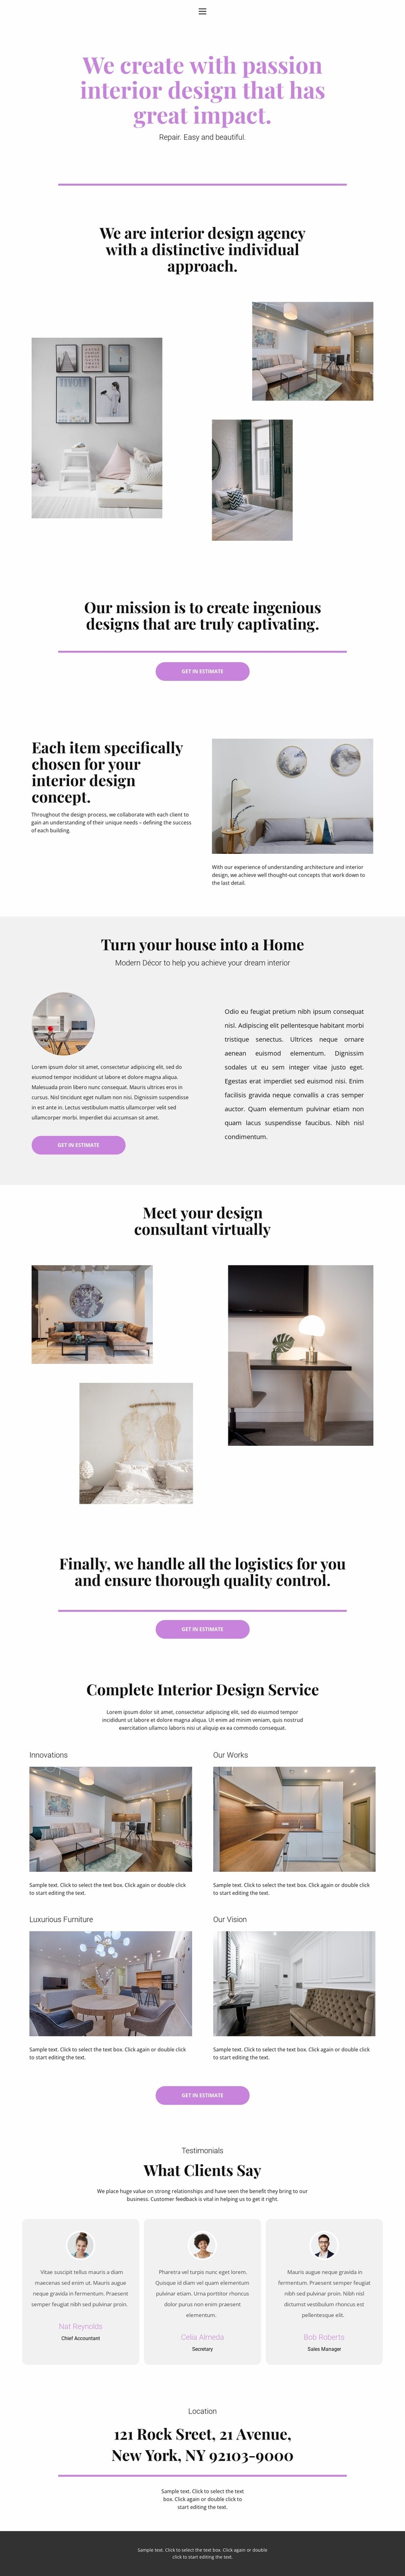 Choice of design for the house Html Website Builder